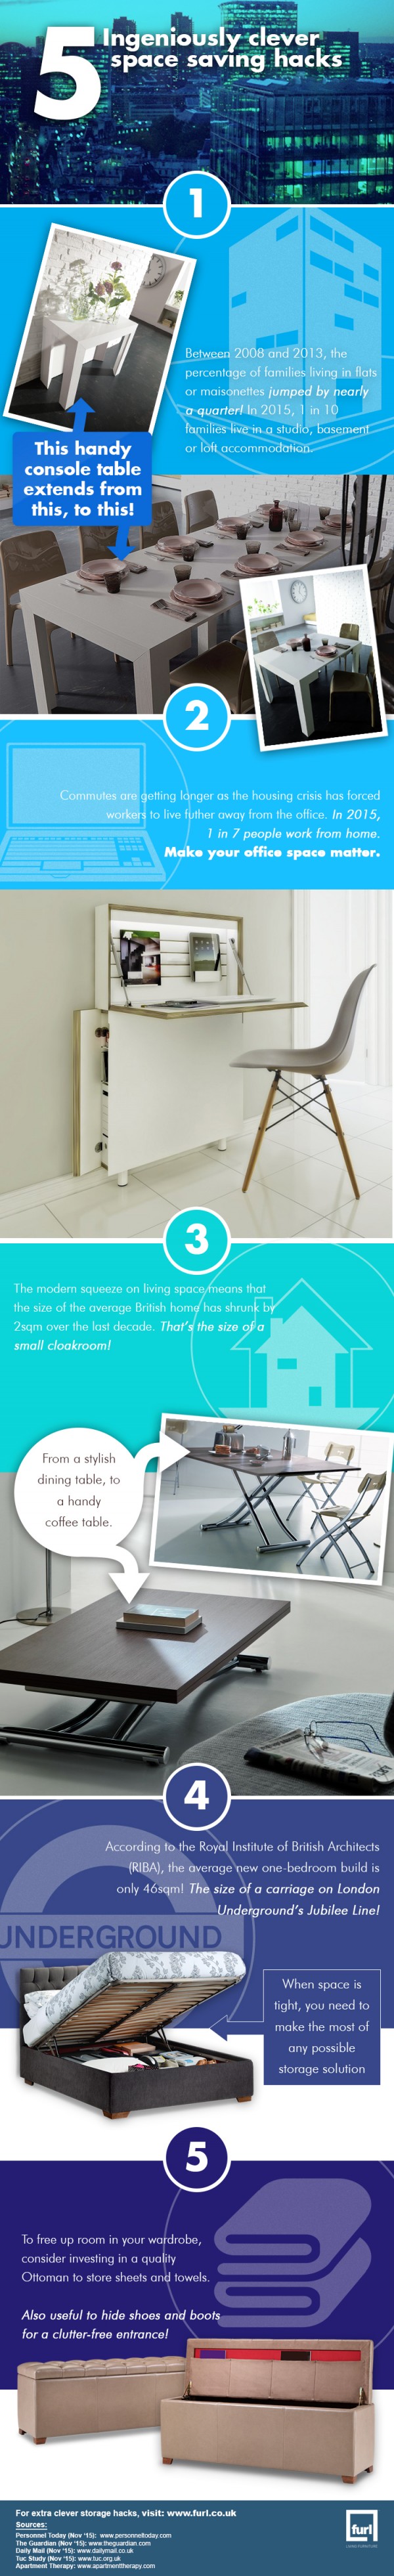 Amazing Hacks And Tips For Space Saving